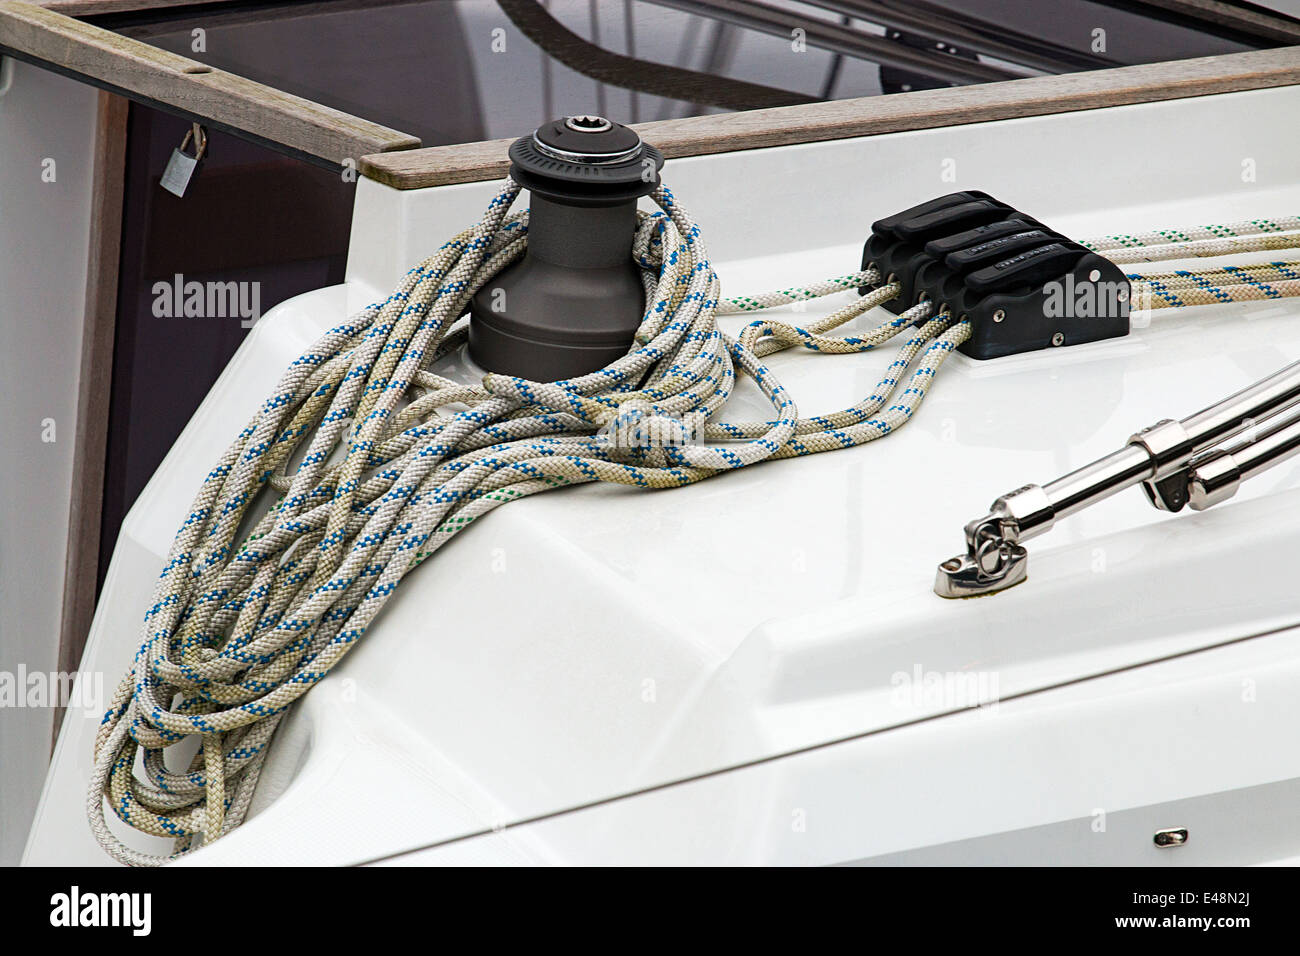 Detail shot of a winch on a yacht or sail boat great concept for leisure boating Stock Photo